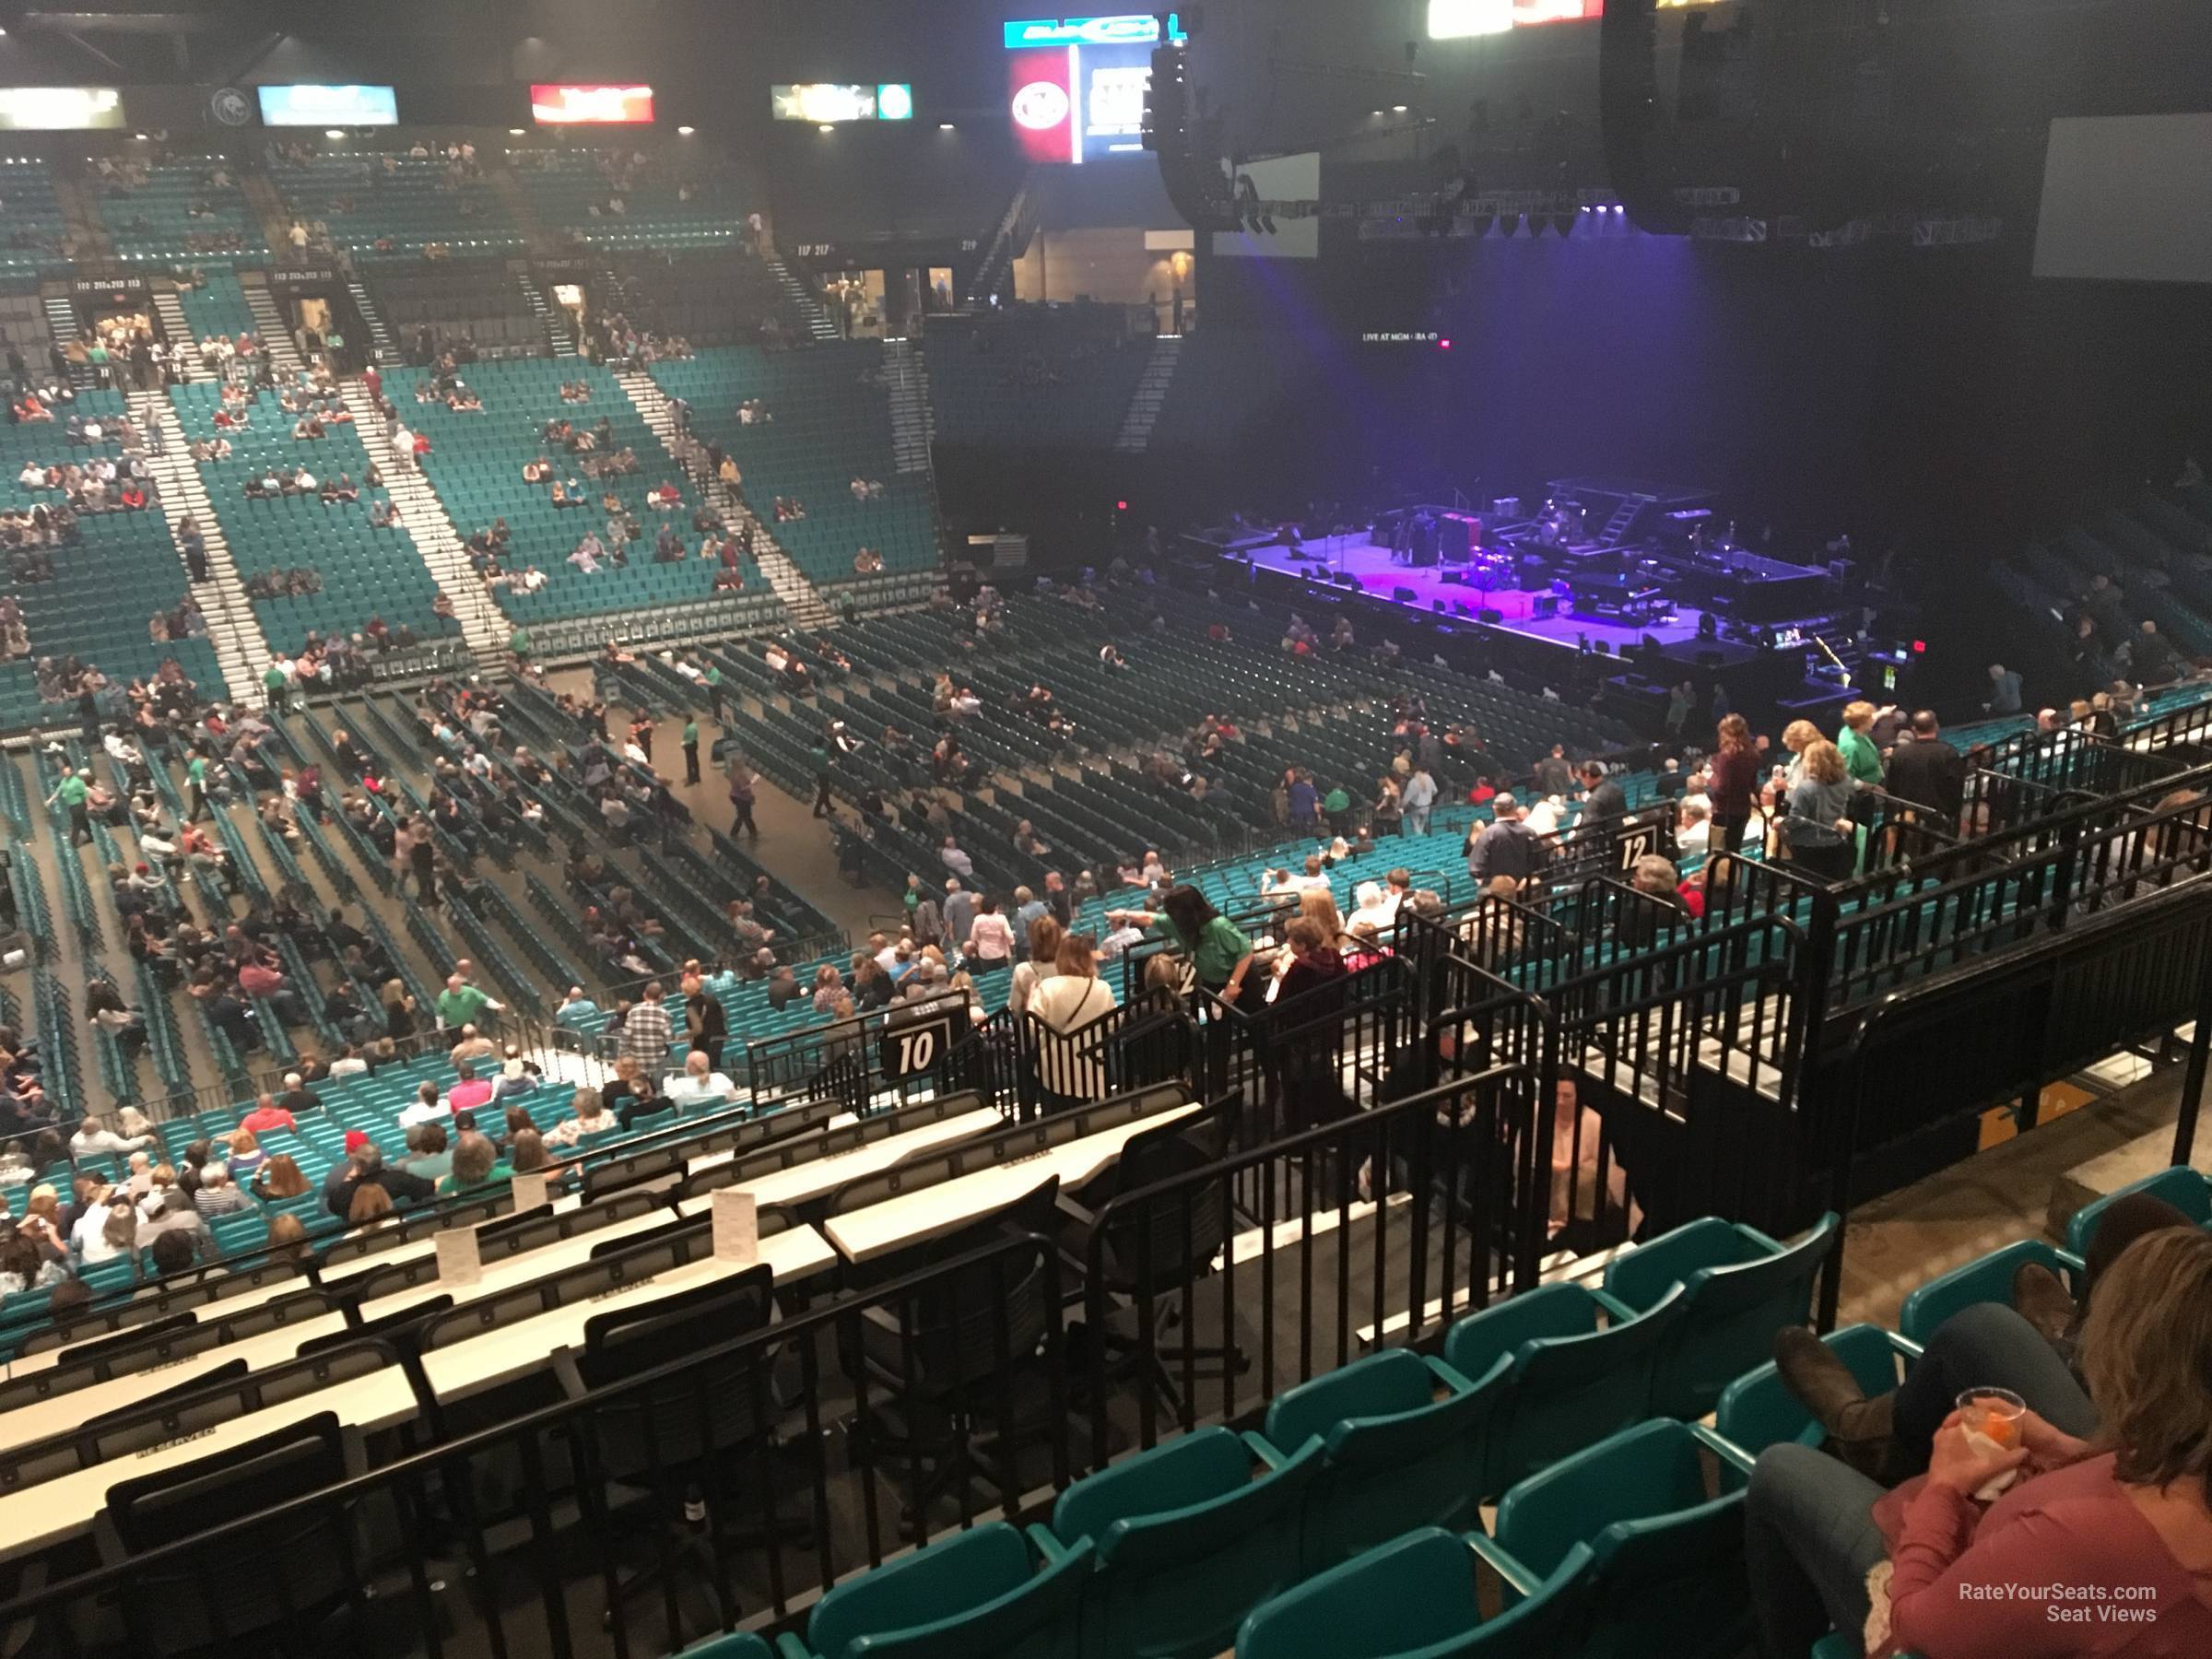 Mgm Grand Garden Arena Section 210 Rateyourseats Com